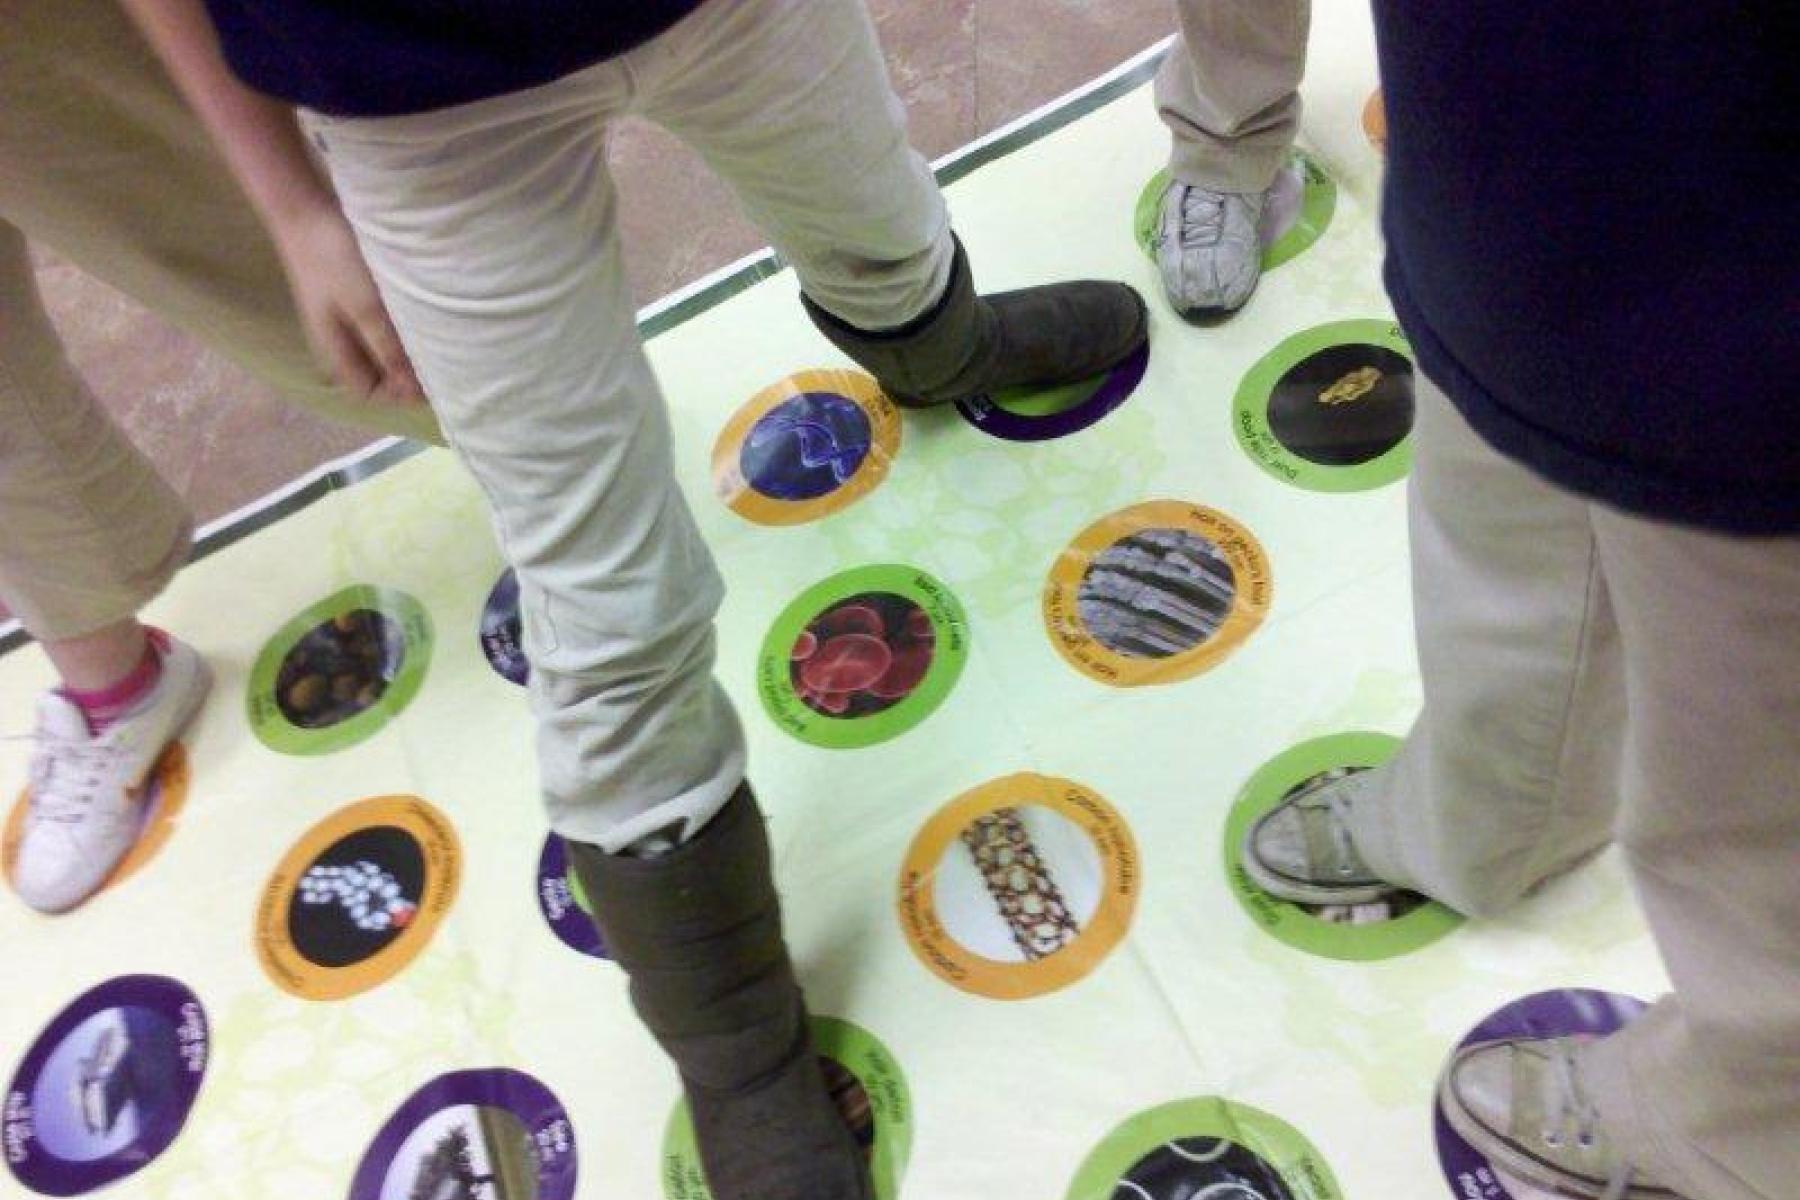 People playing Stretch-ability, a hand and foot game, on a mat.